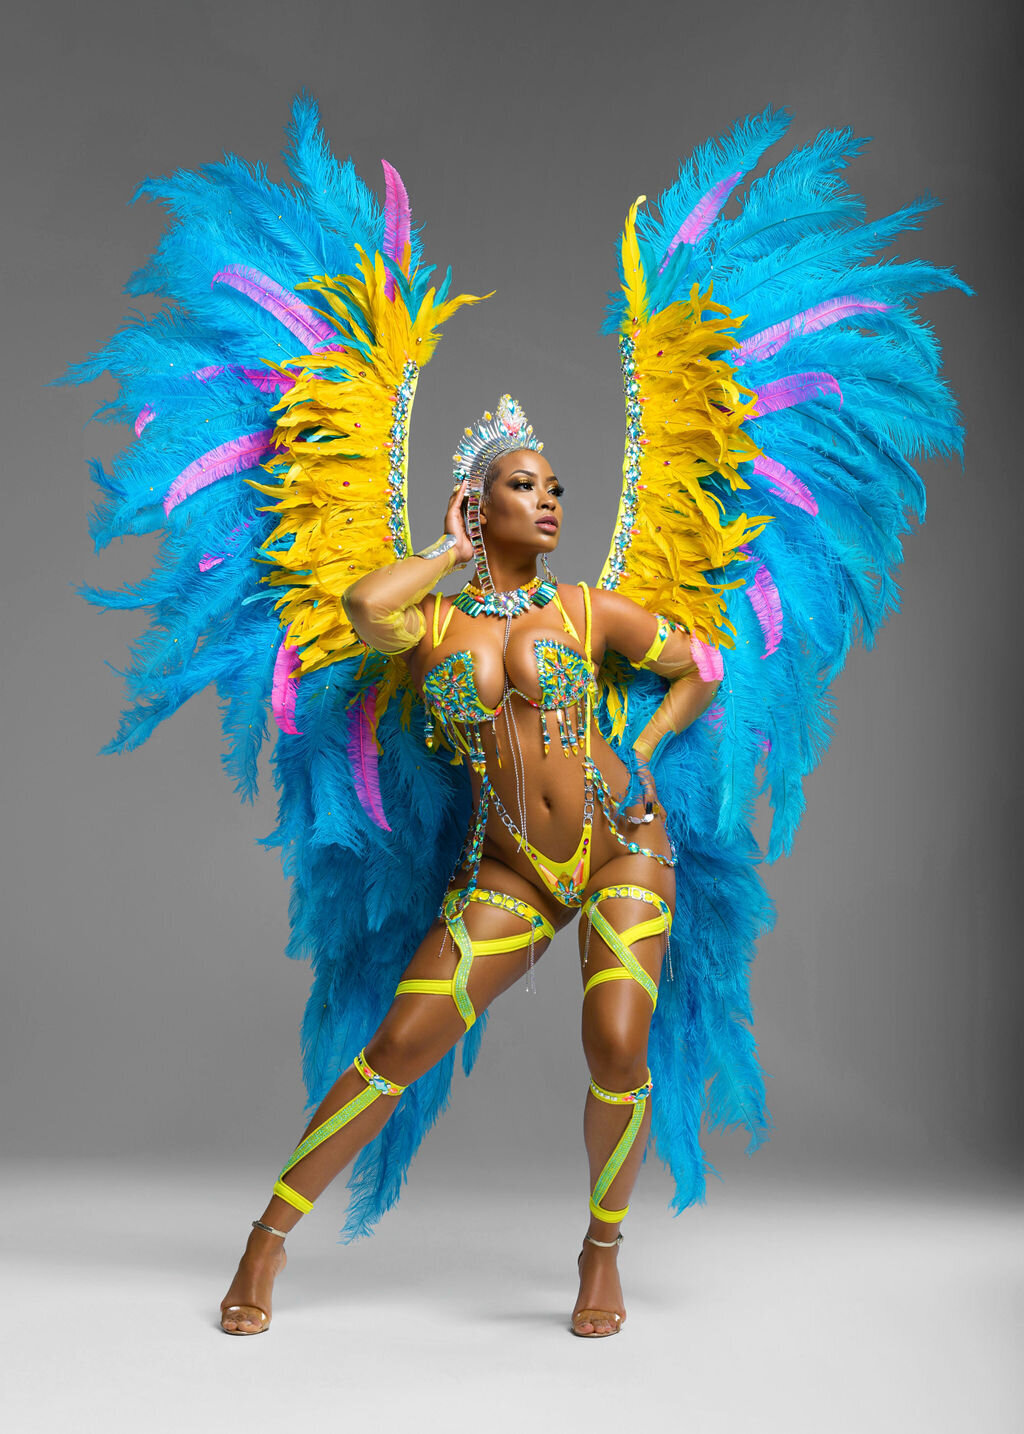 Yellow costume for Caribana Toronto. Register to play mas with Sunlime Mas